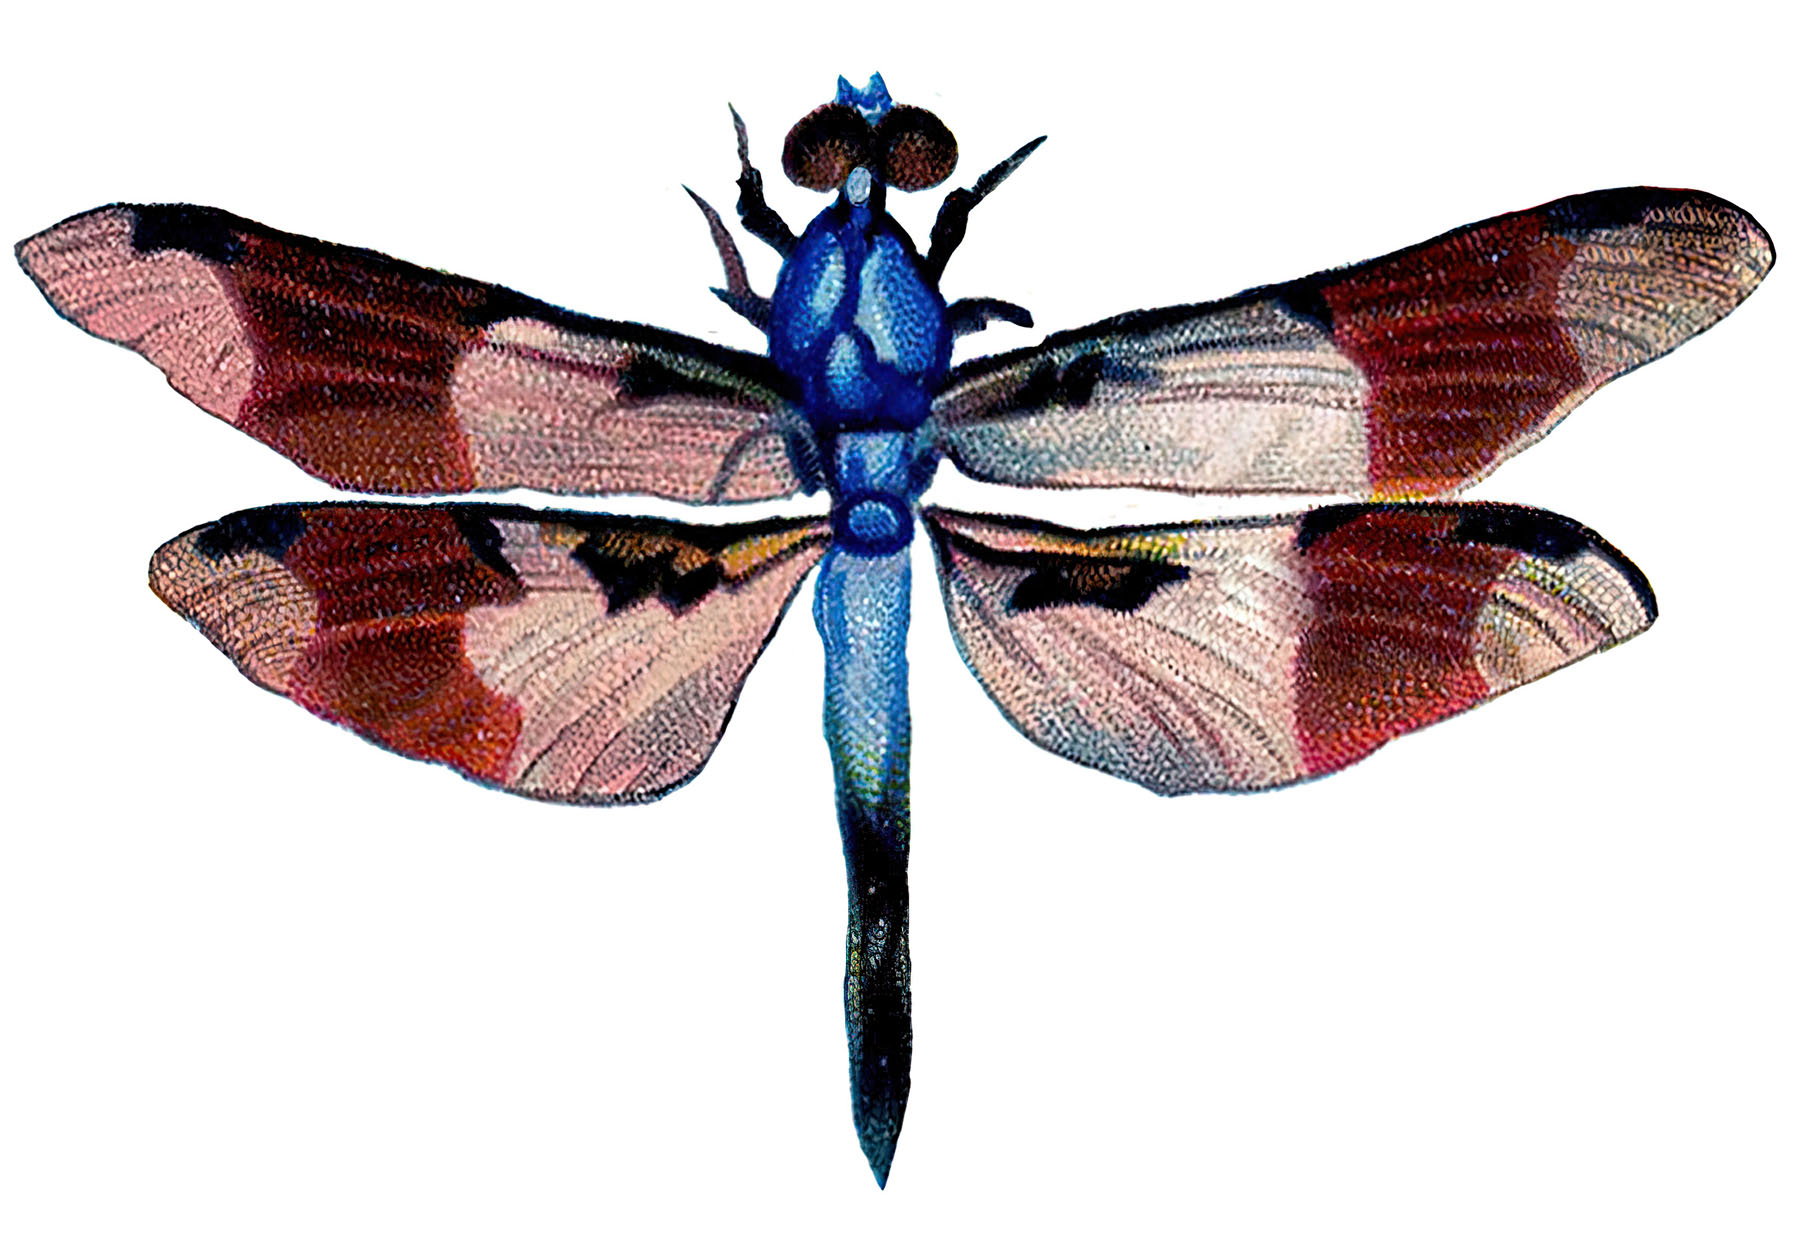 Blue Dragonfly Image